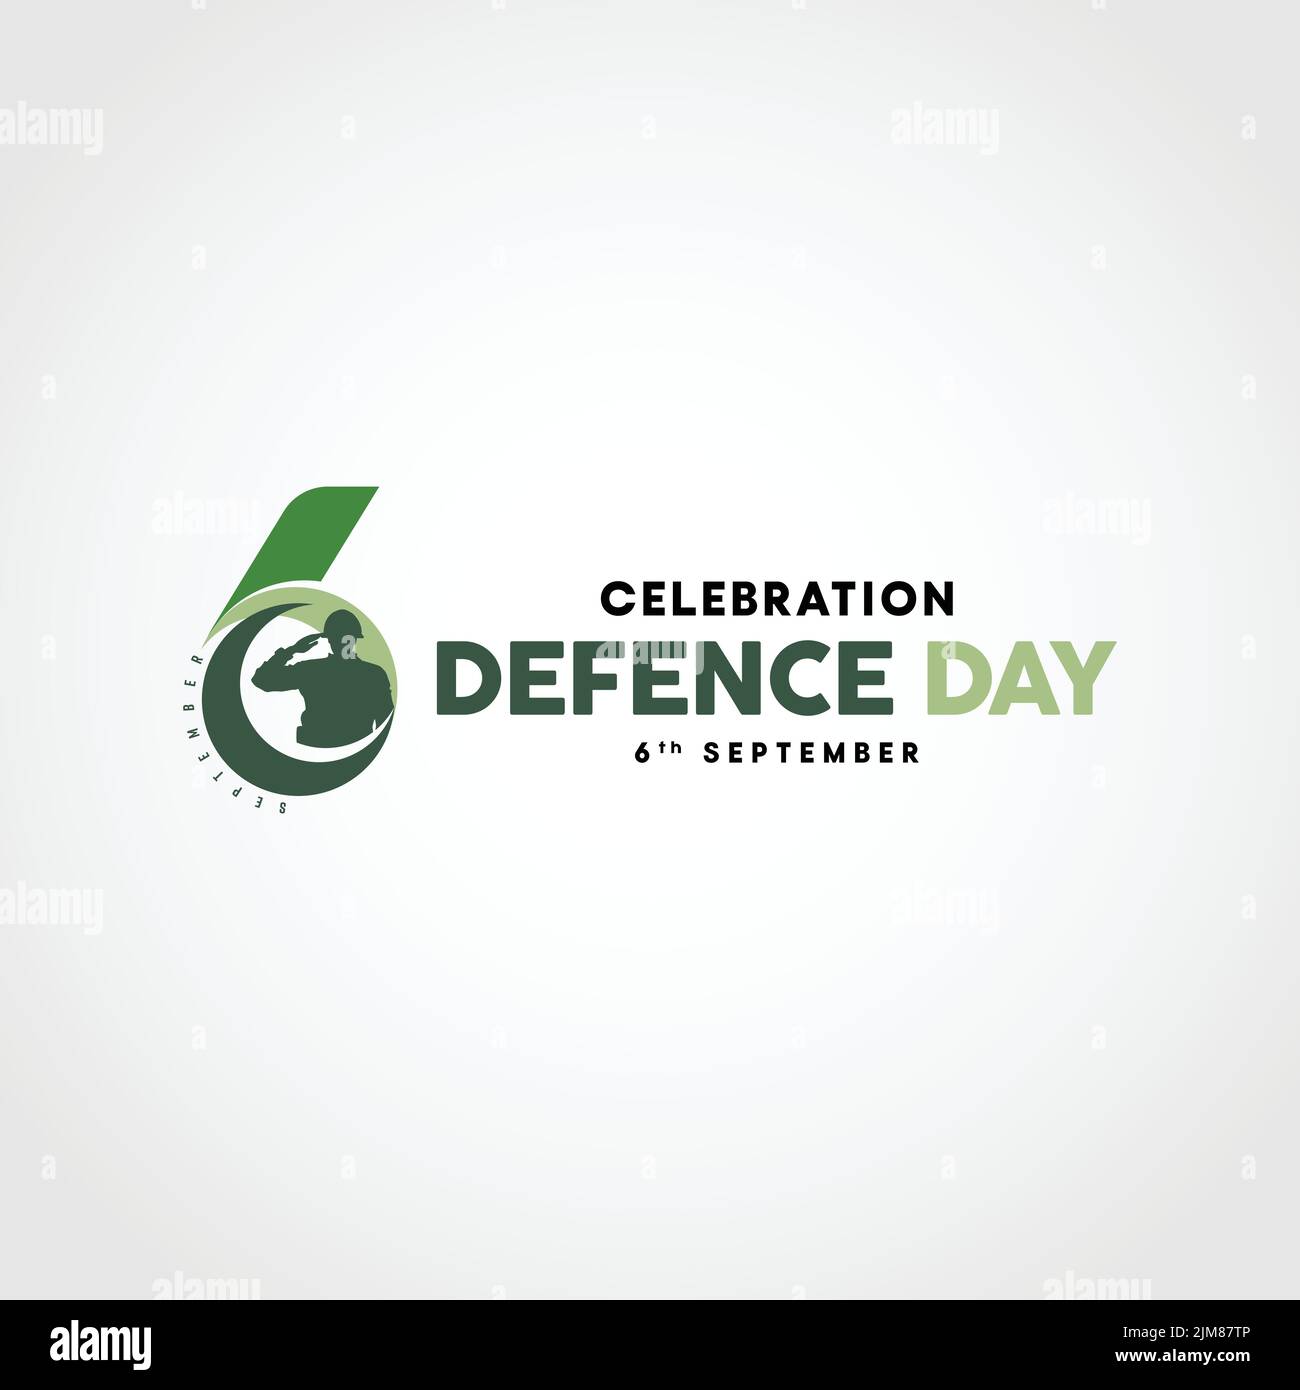 Celebration Defence Day of Pakistan, 6th September Stock Vector